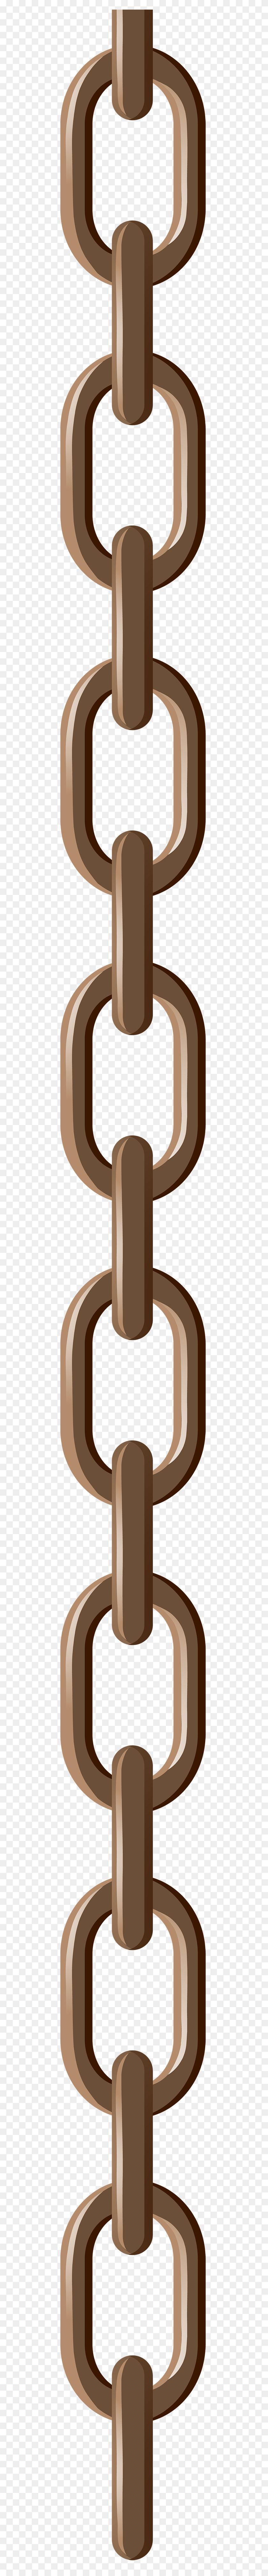 538x8000 Chain Png Clip Art - Chain PNG